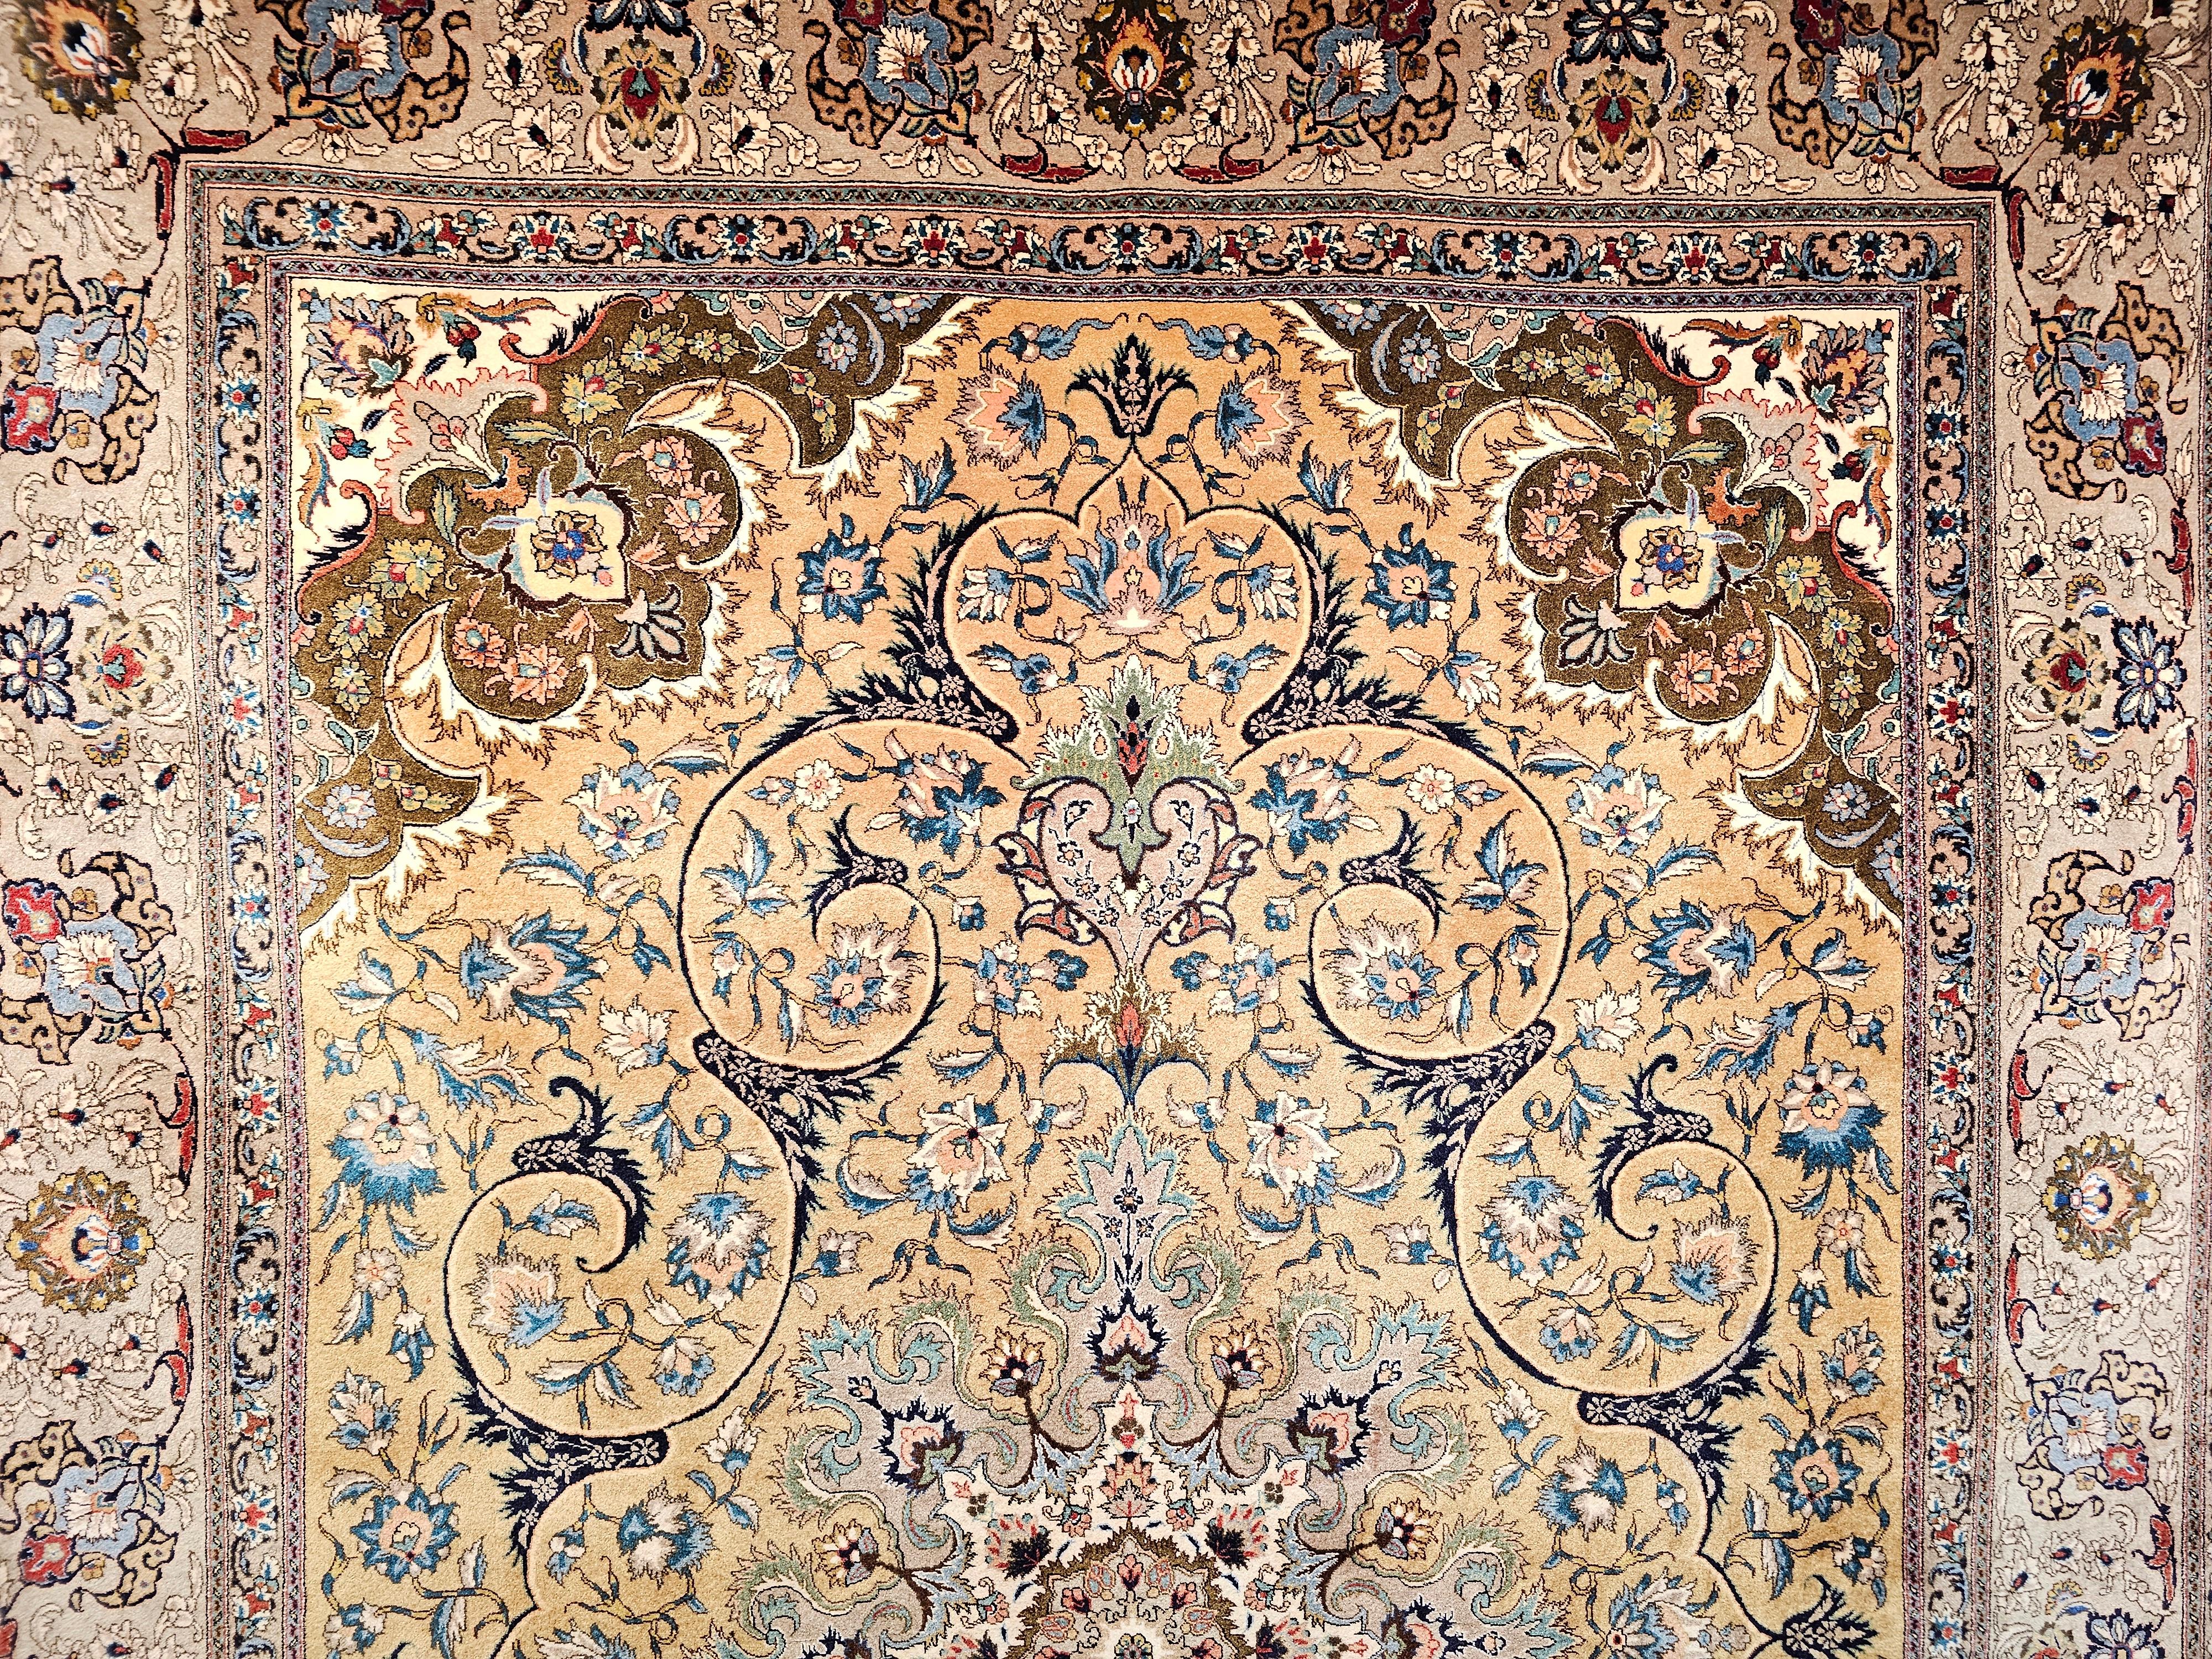 A beautiful room-size Persian Tabriz in a floral pattern with wonderful colors of camelhair, moss green, ivory, and pewter from the early 1900s.  The rug has a wonderful design and a very unique and rare color combination.  It has a caramel or wheat